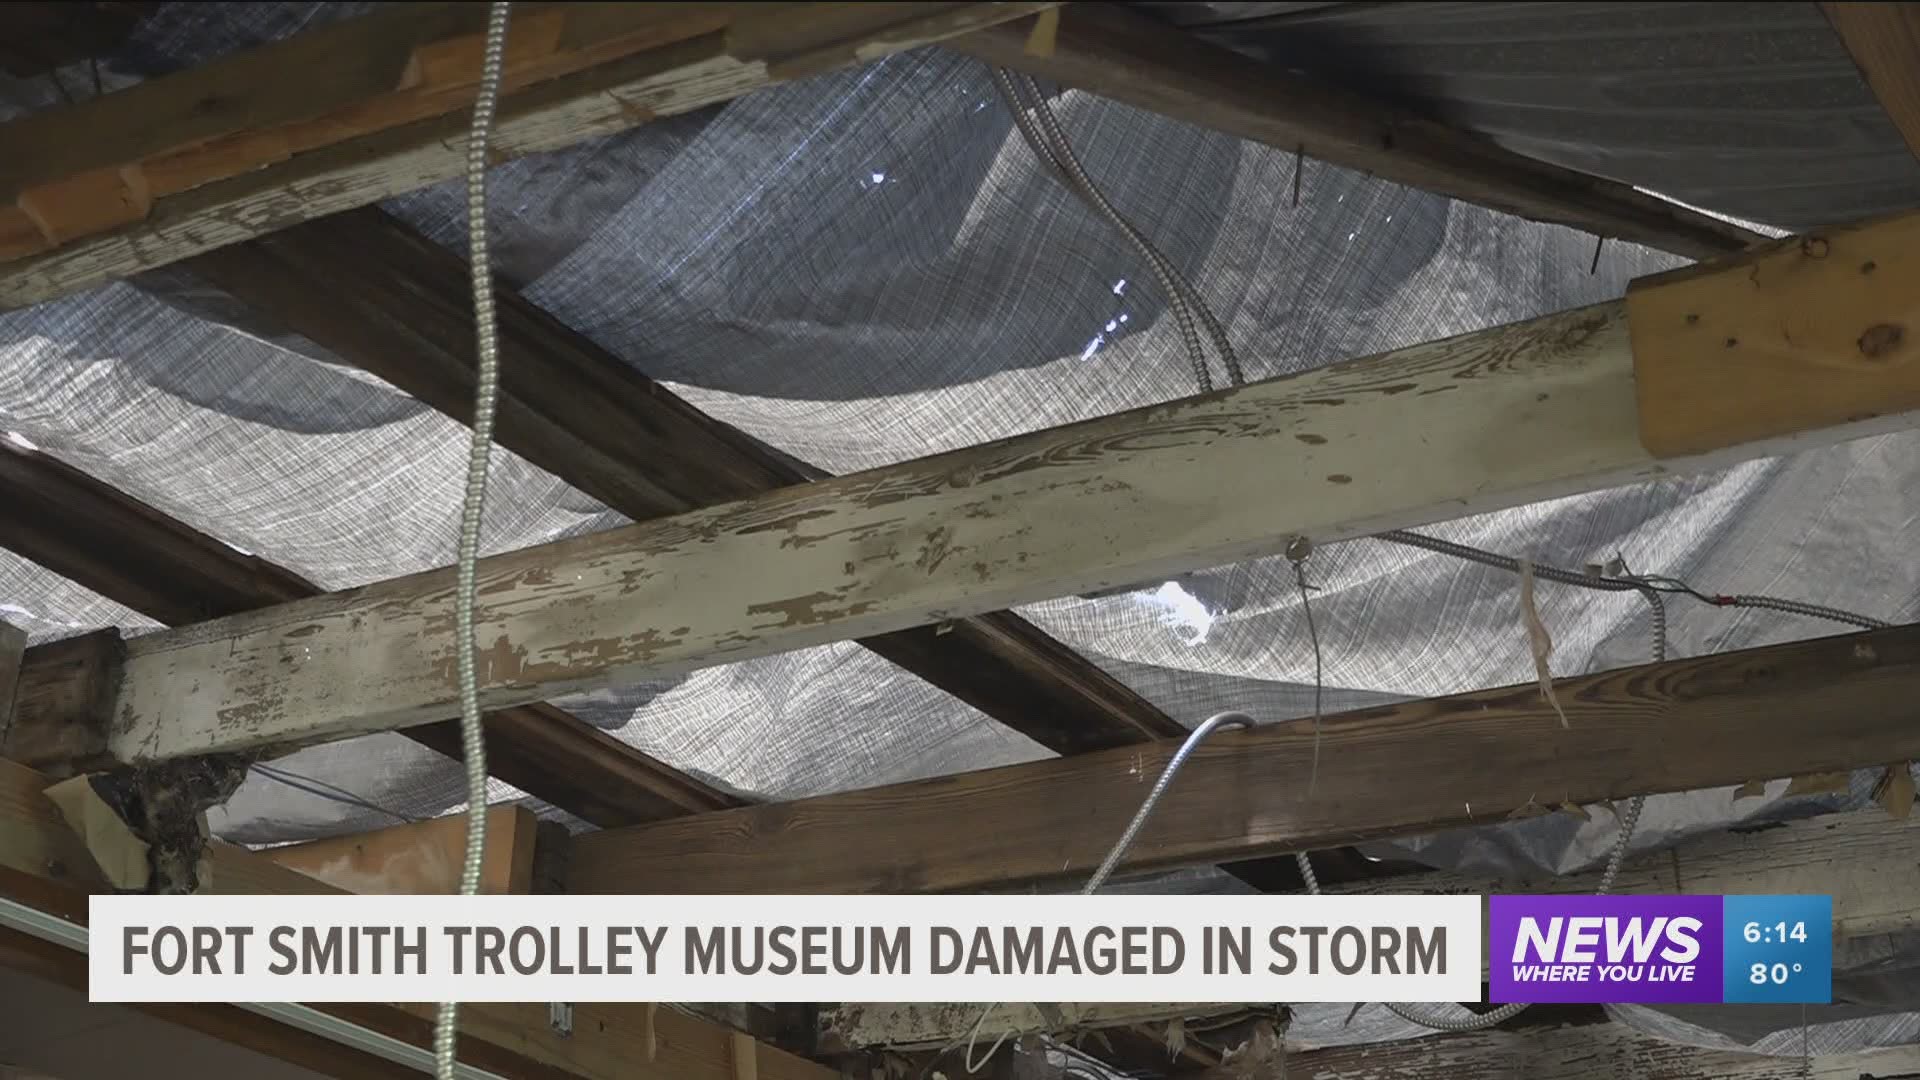 The storm that moved through the River Valley early Friday (Aug. 14) morning left the Fort Smith Trolley Museum damaged. https://bit.ly/3aAahga